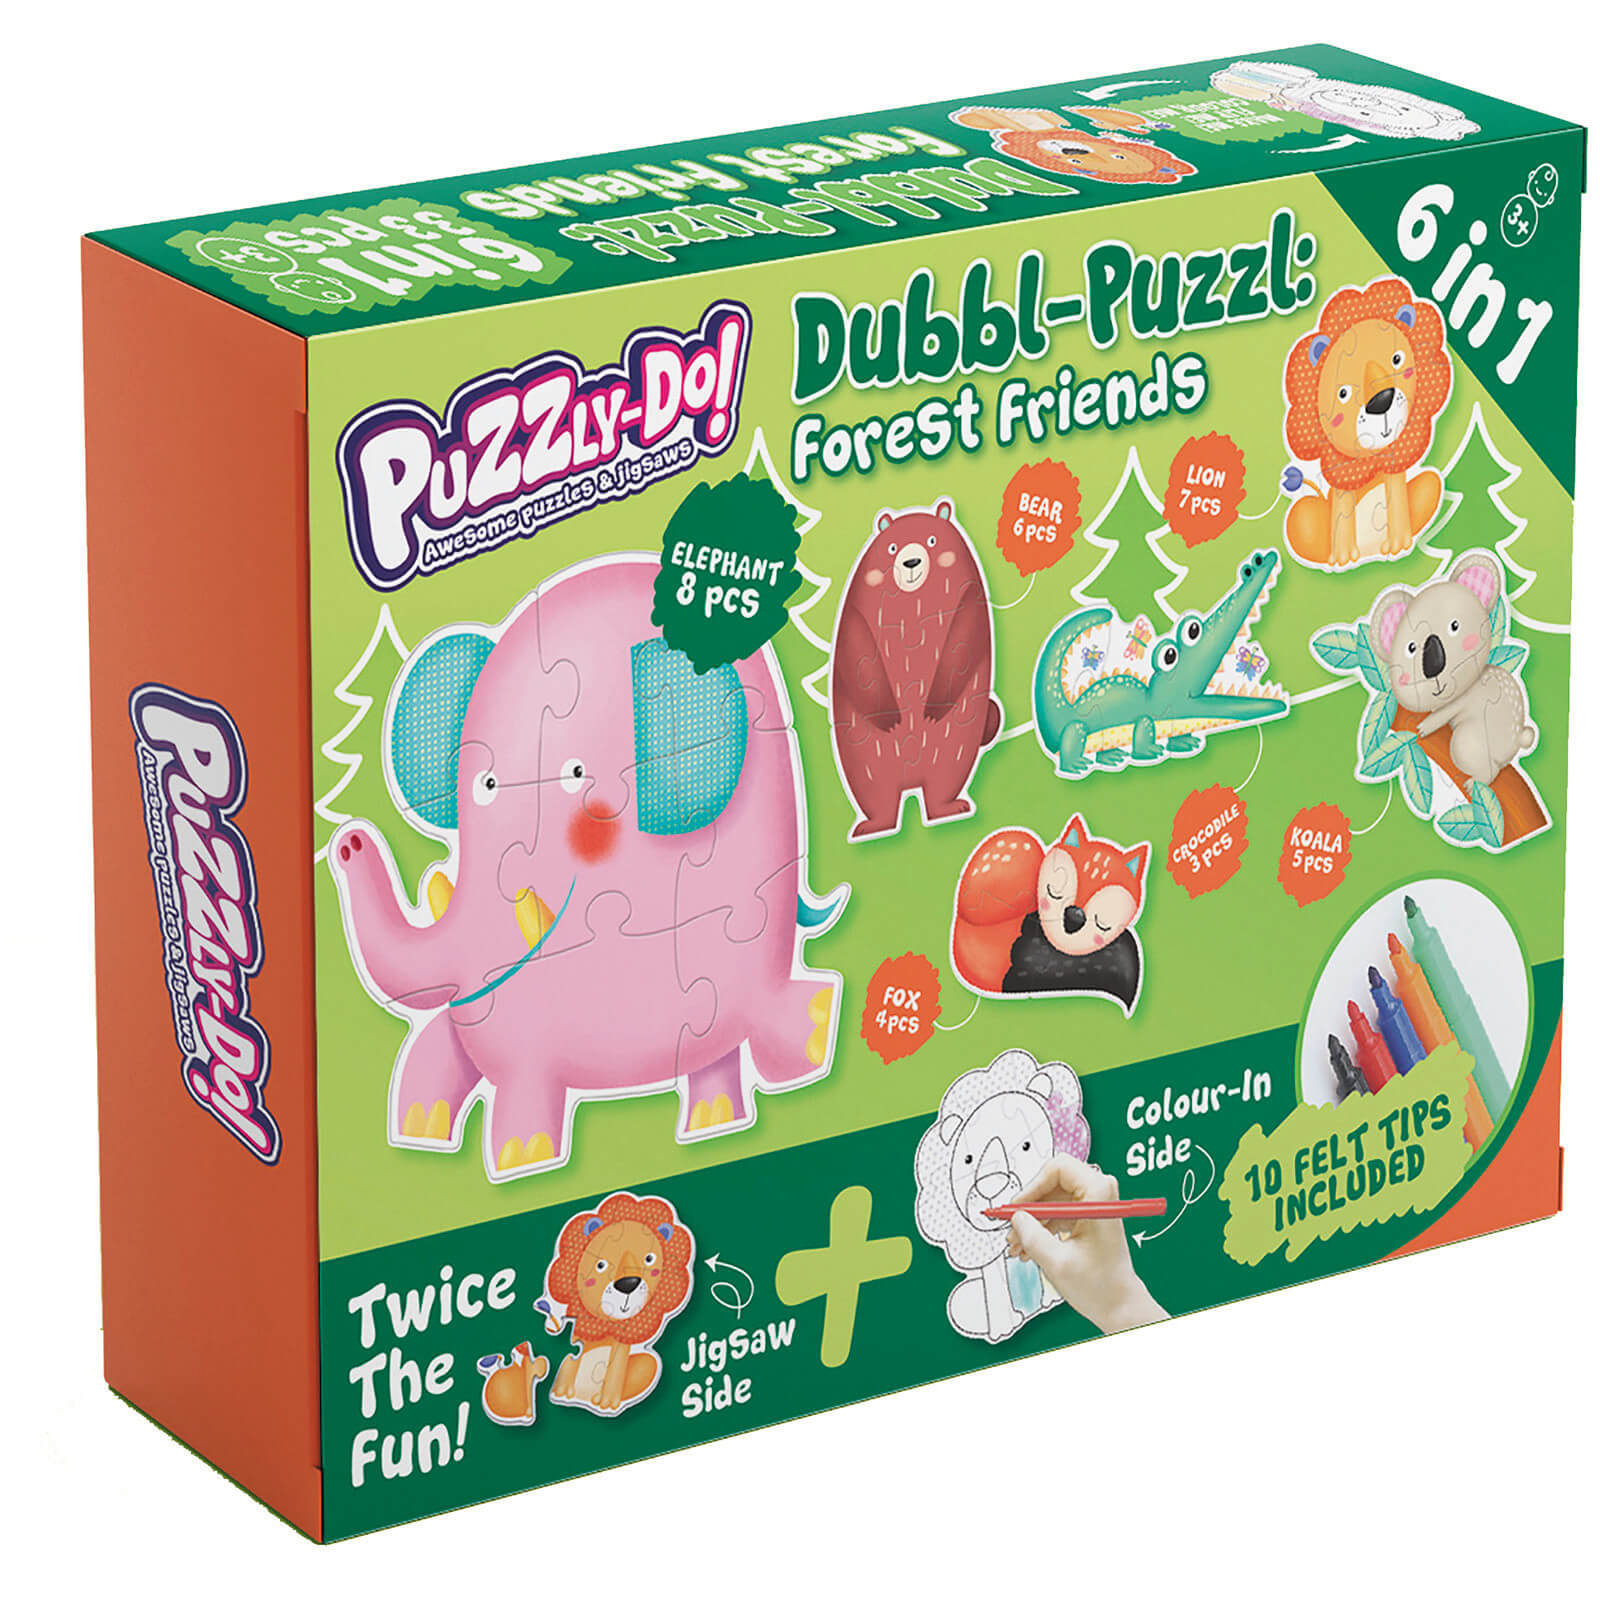 Puzzly-Do Forest Friends Dubbl-Puzzl Jigsaw and Colouring